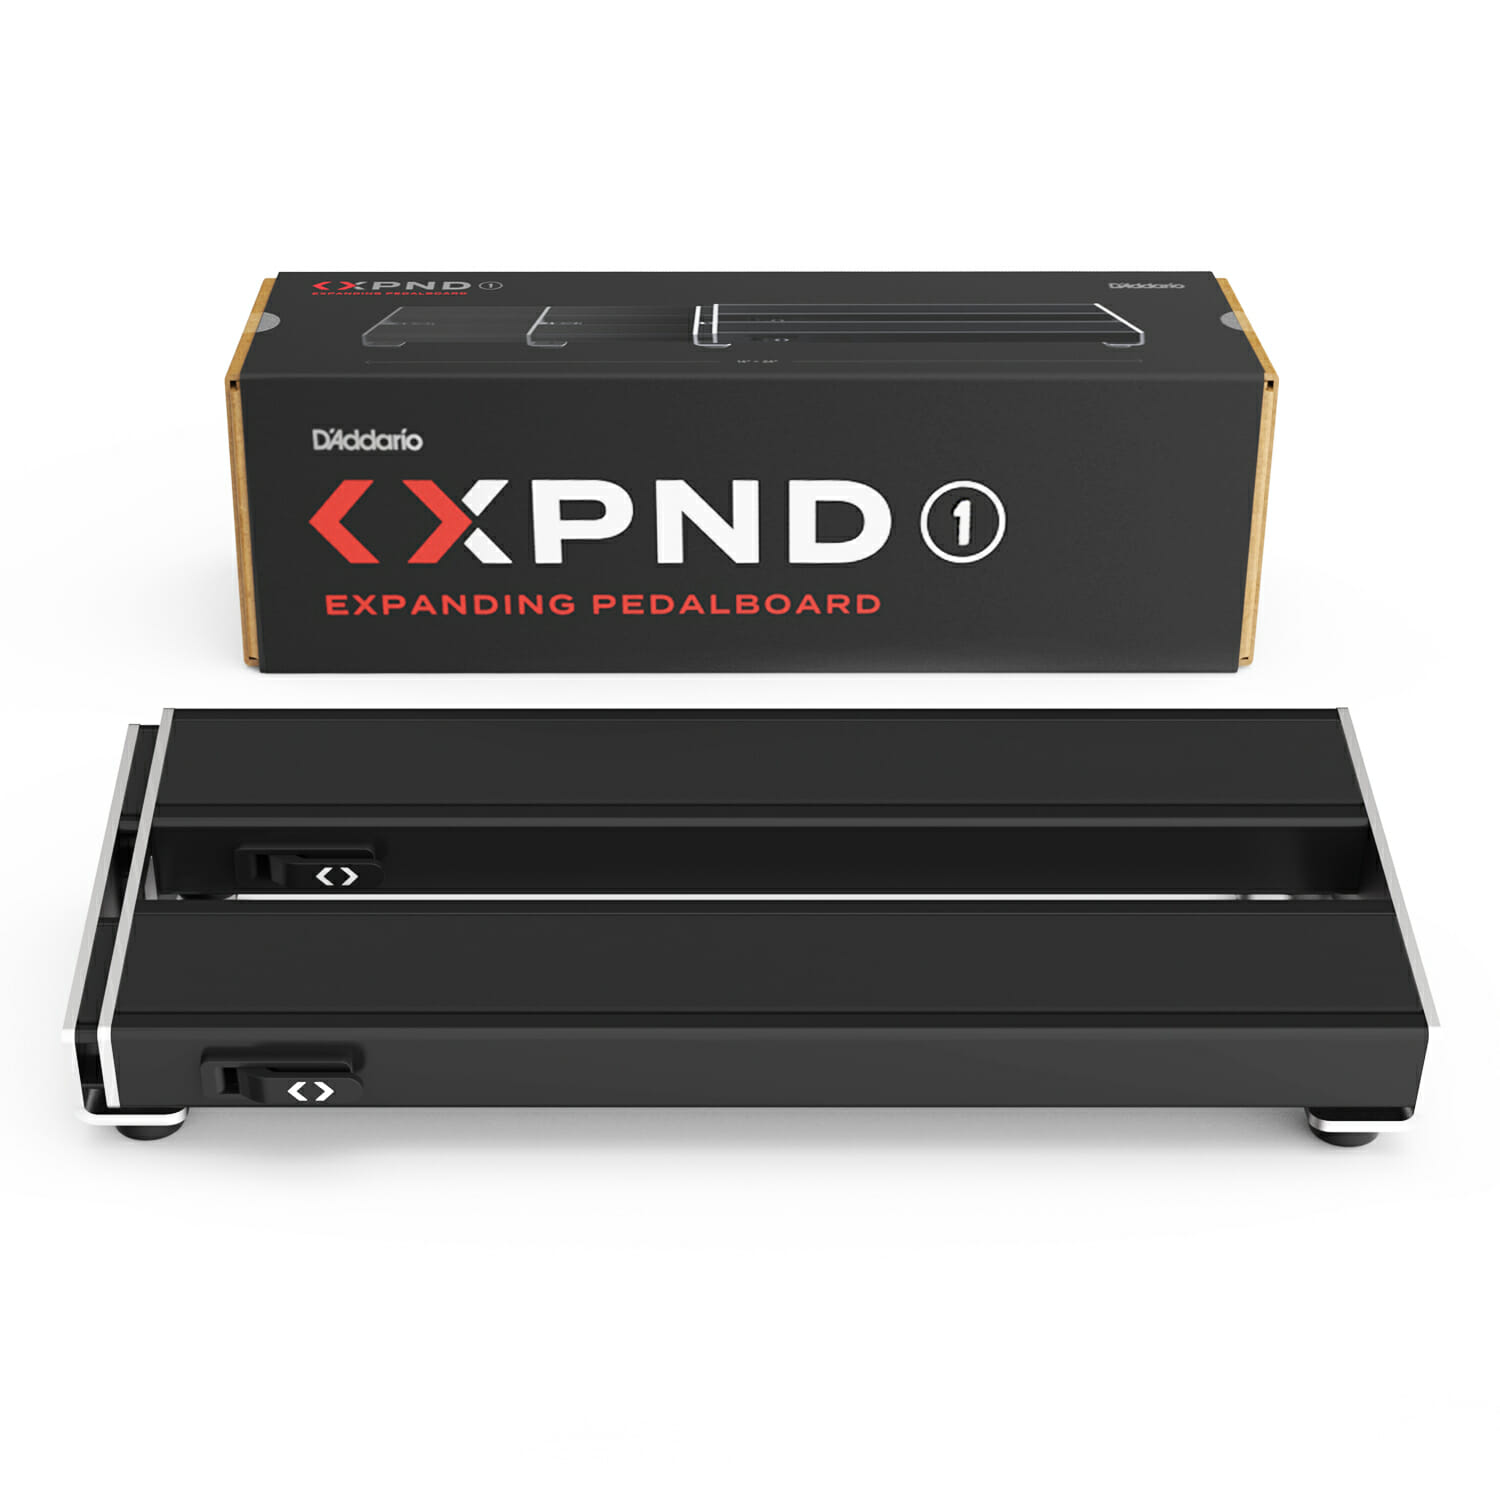 D'Addario,　XPND　You'll　55%　The　Need　Pedalboard　Ever　Board　Only　OFF